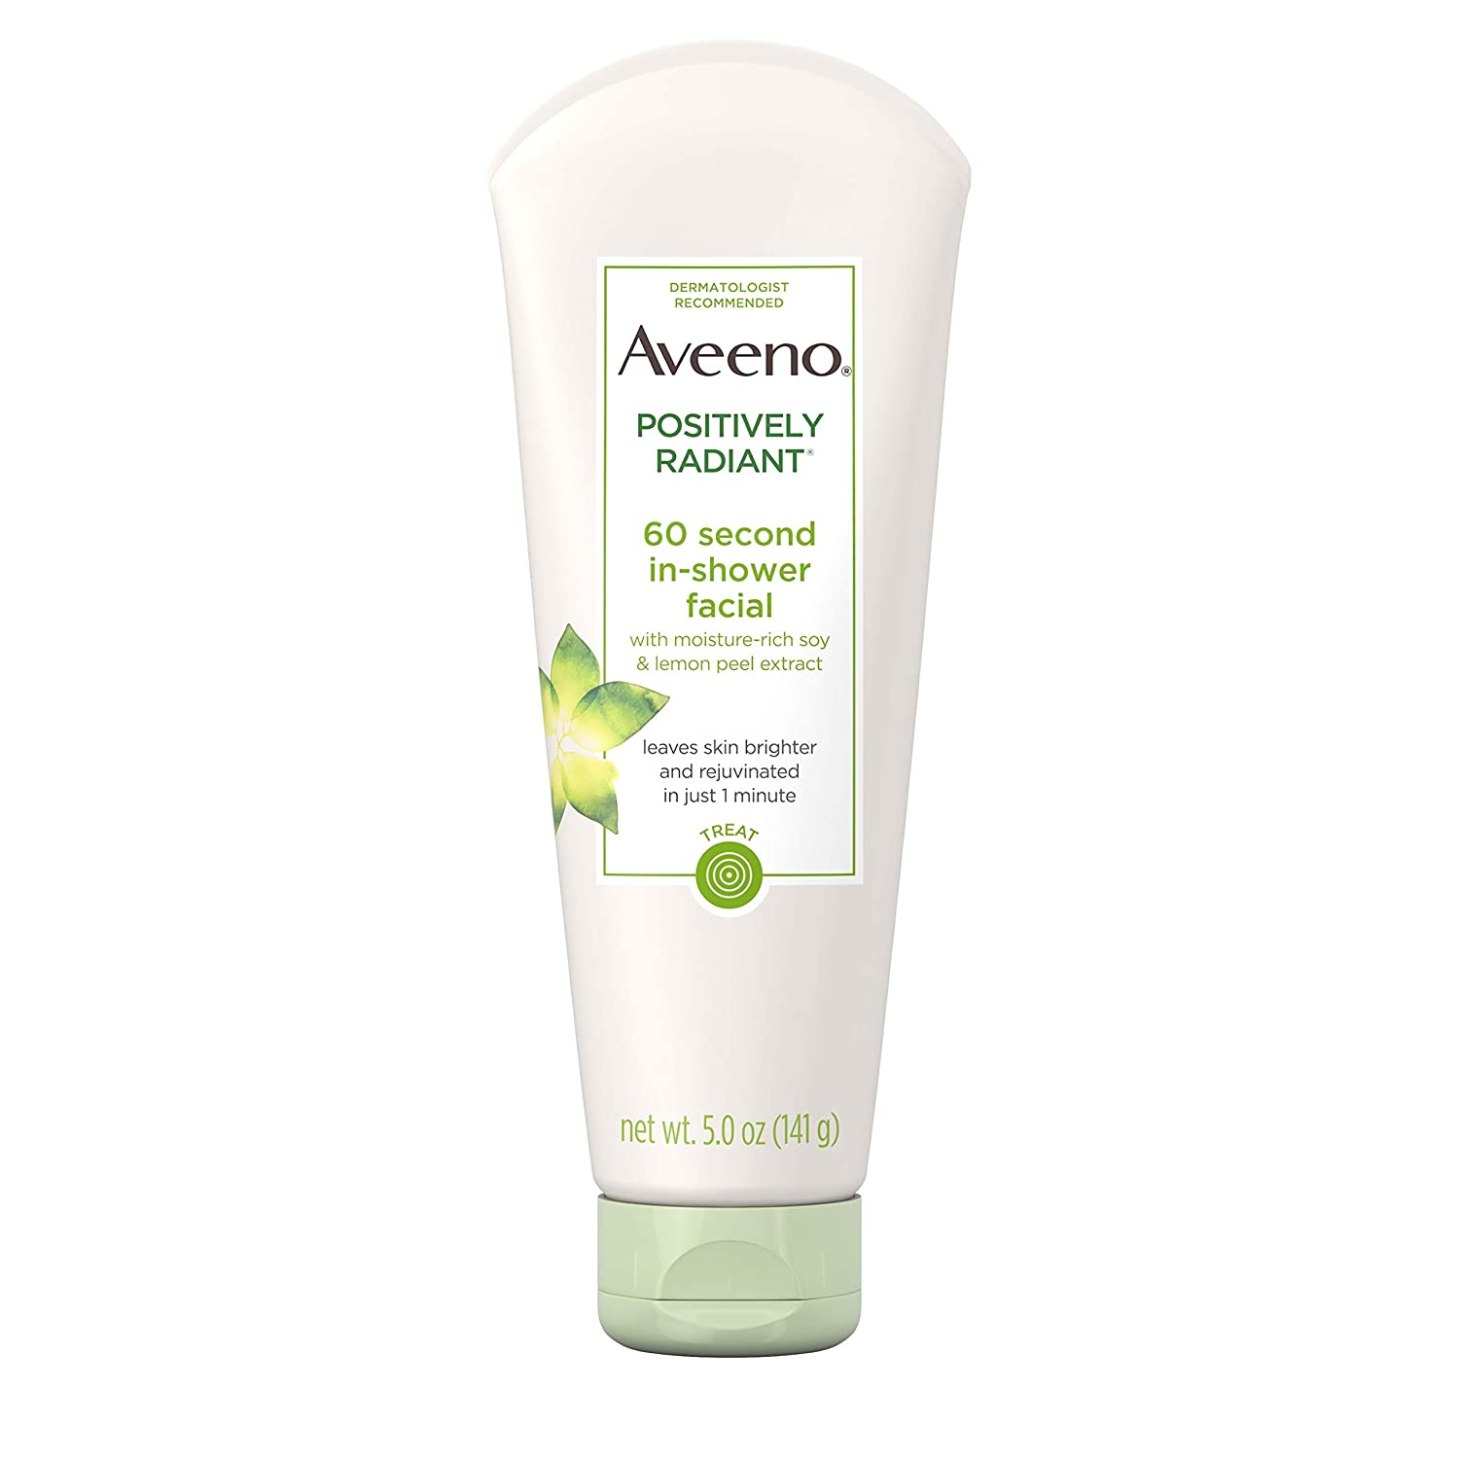 Aveeno Positively Radiant 60-Second In-Shower Facial, signs you need to exfoliate